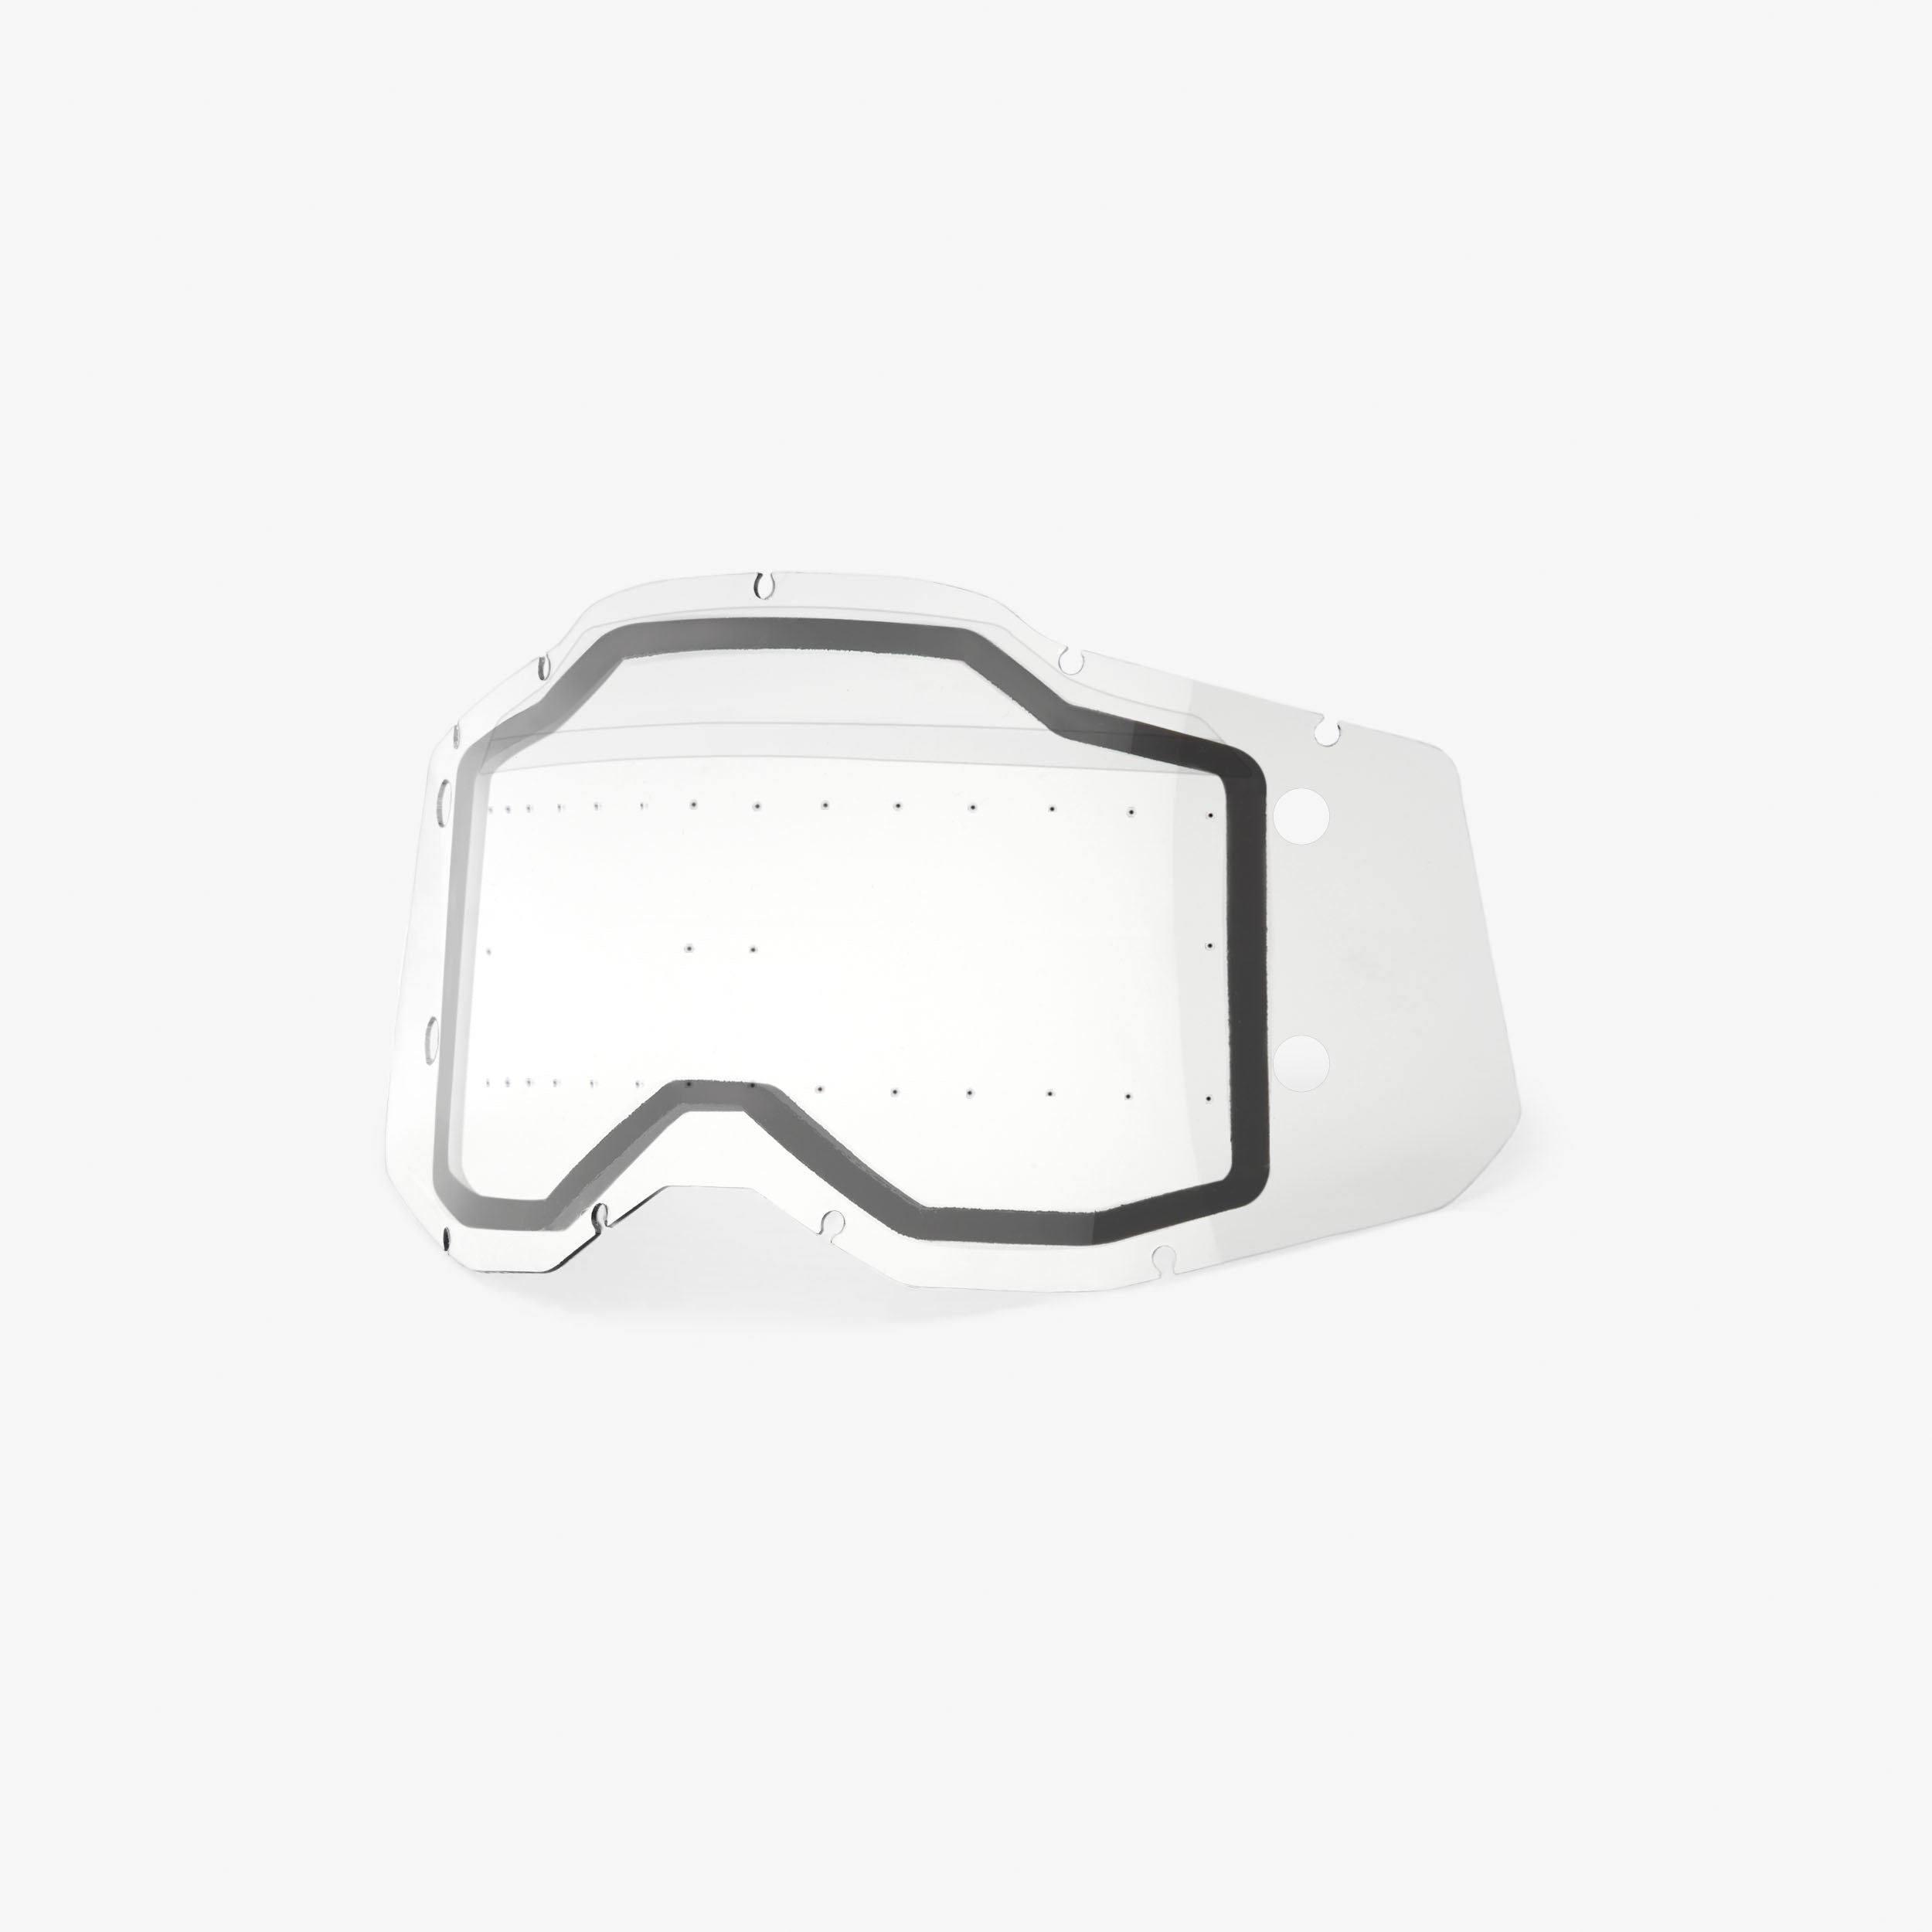 RACECRAFT2/ACCURI2/STRATA2 FORECAST Replacement Lens - Dual Pane w/ bumps Clear